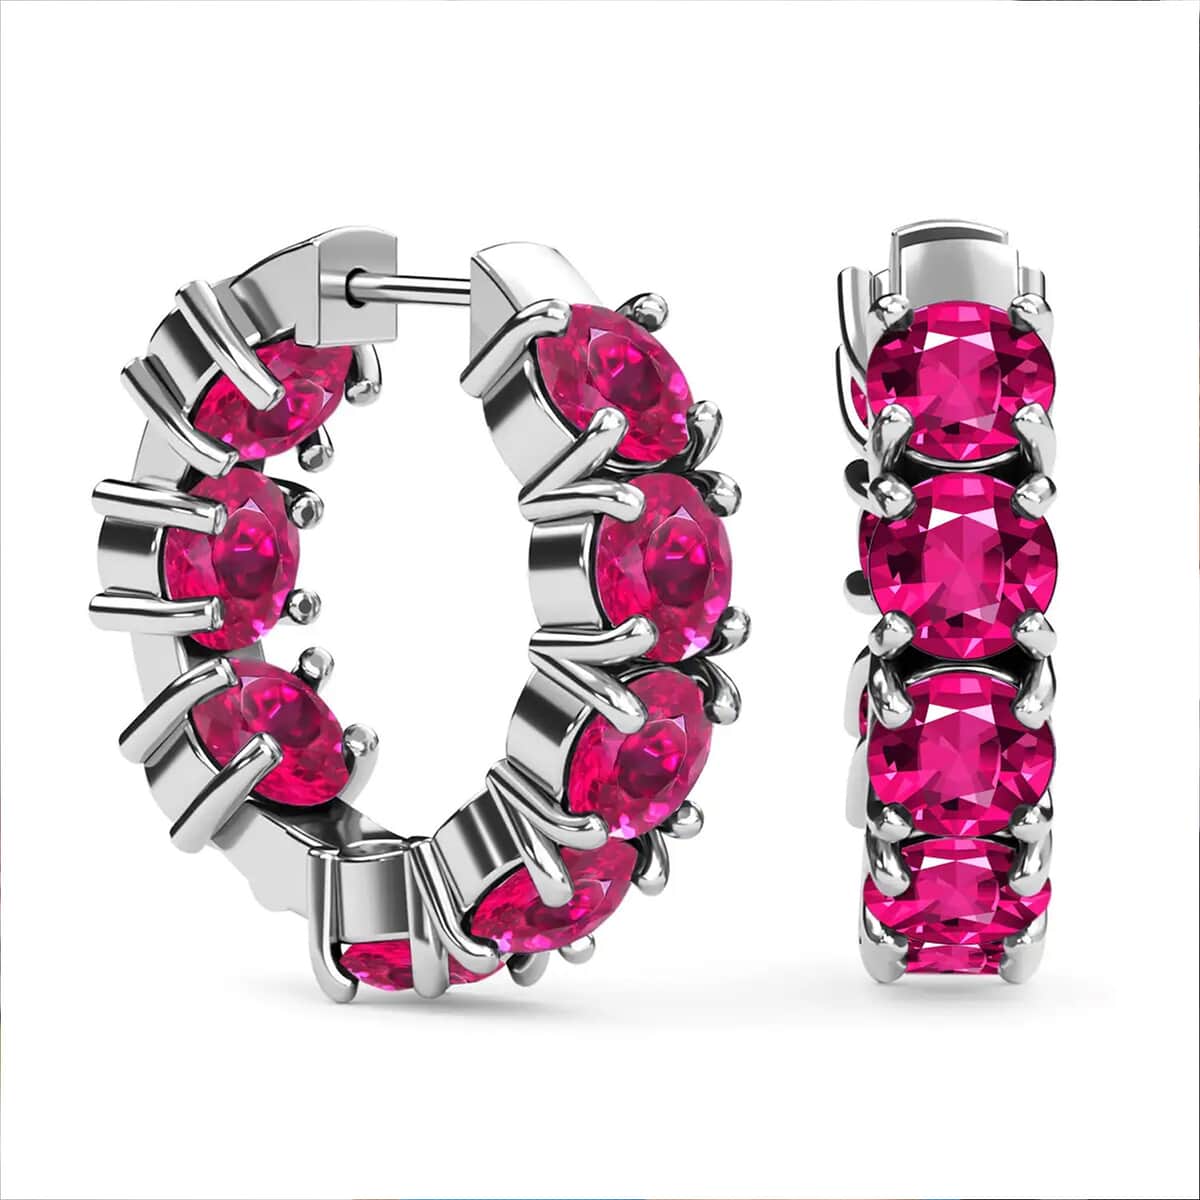 Simulated Ruby Color Diamond Earrings in Stainless Steel, Inside Out Hoops, Simulated Diamond Jewelry For Women image number 0